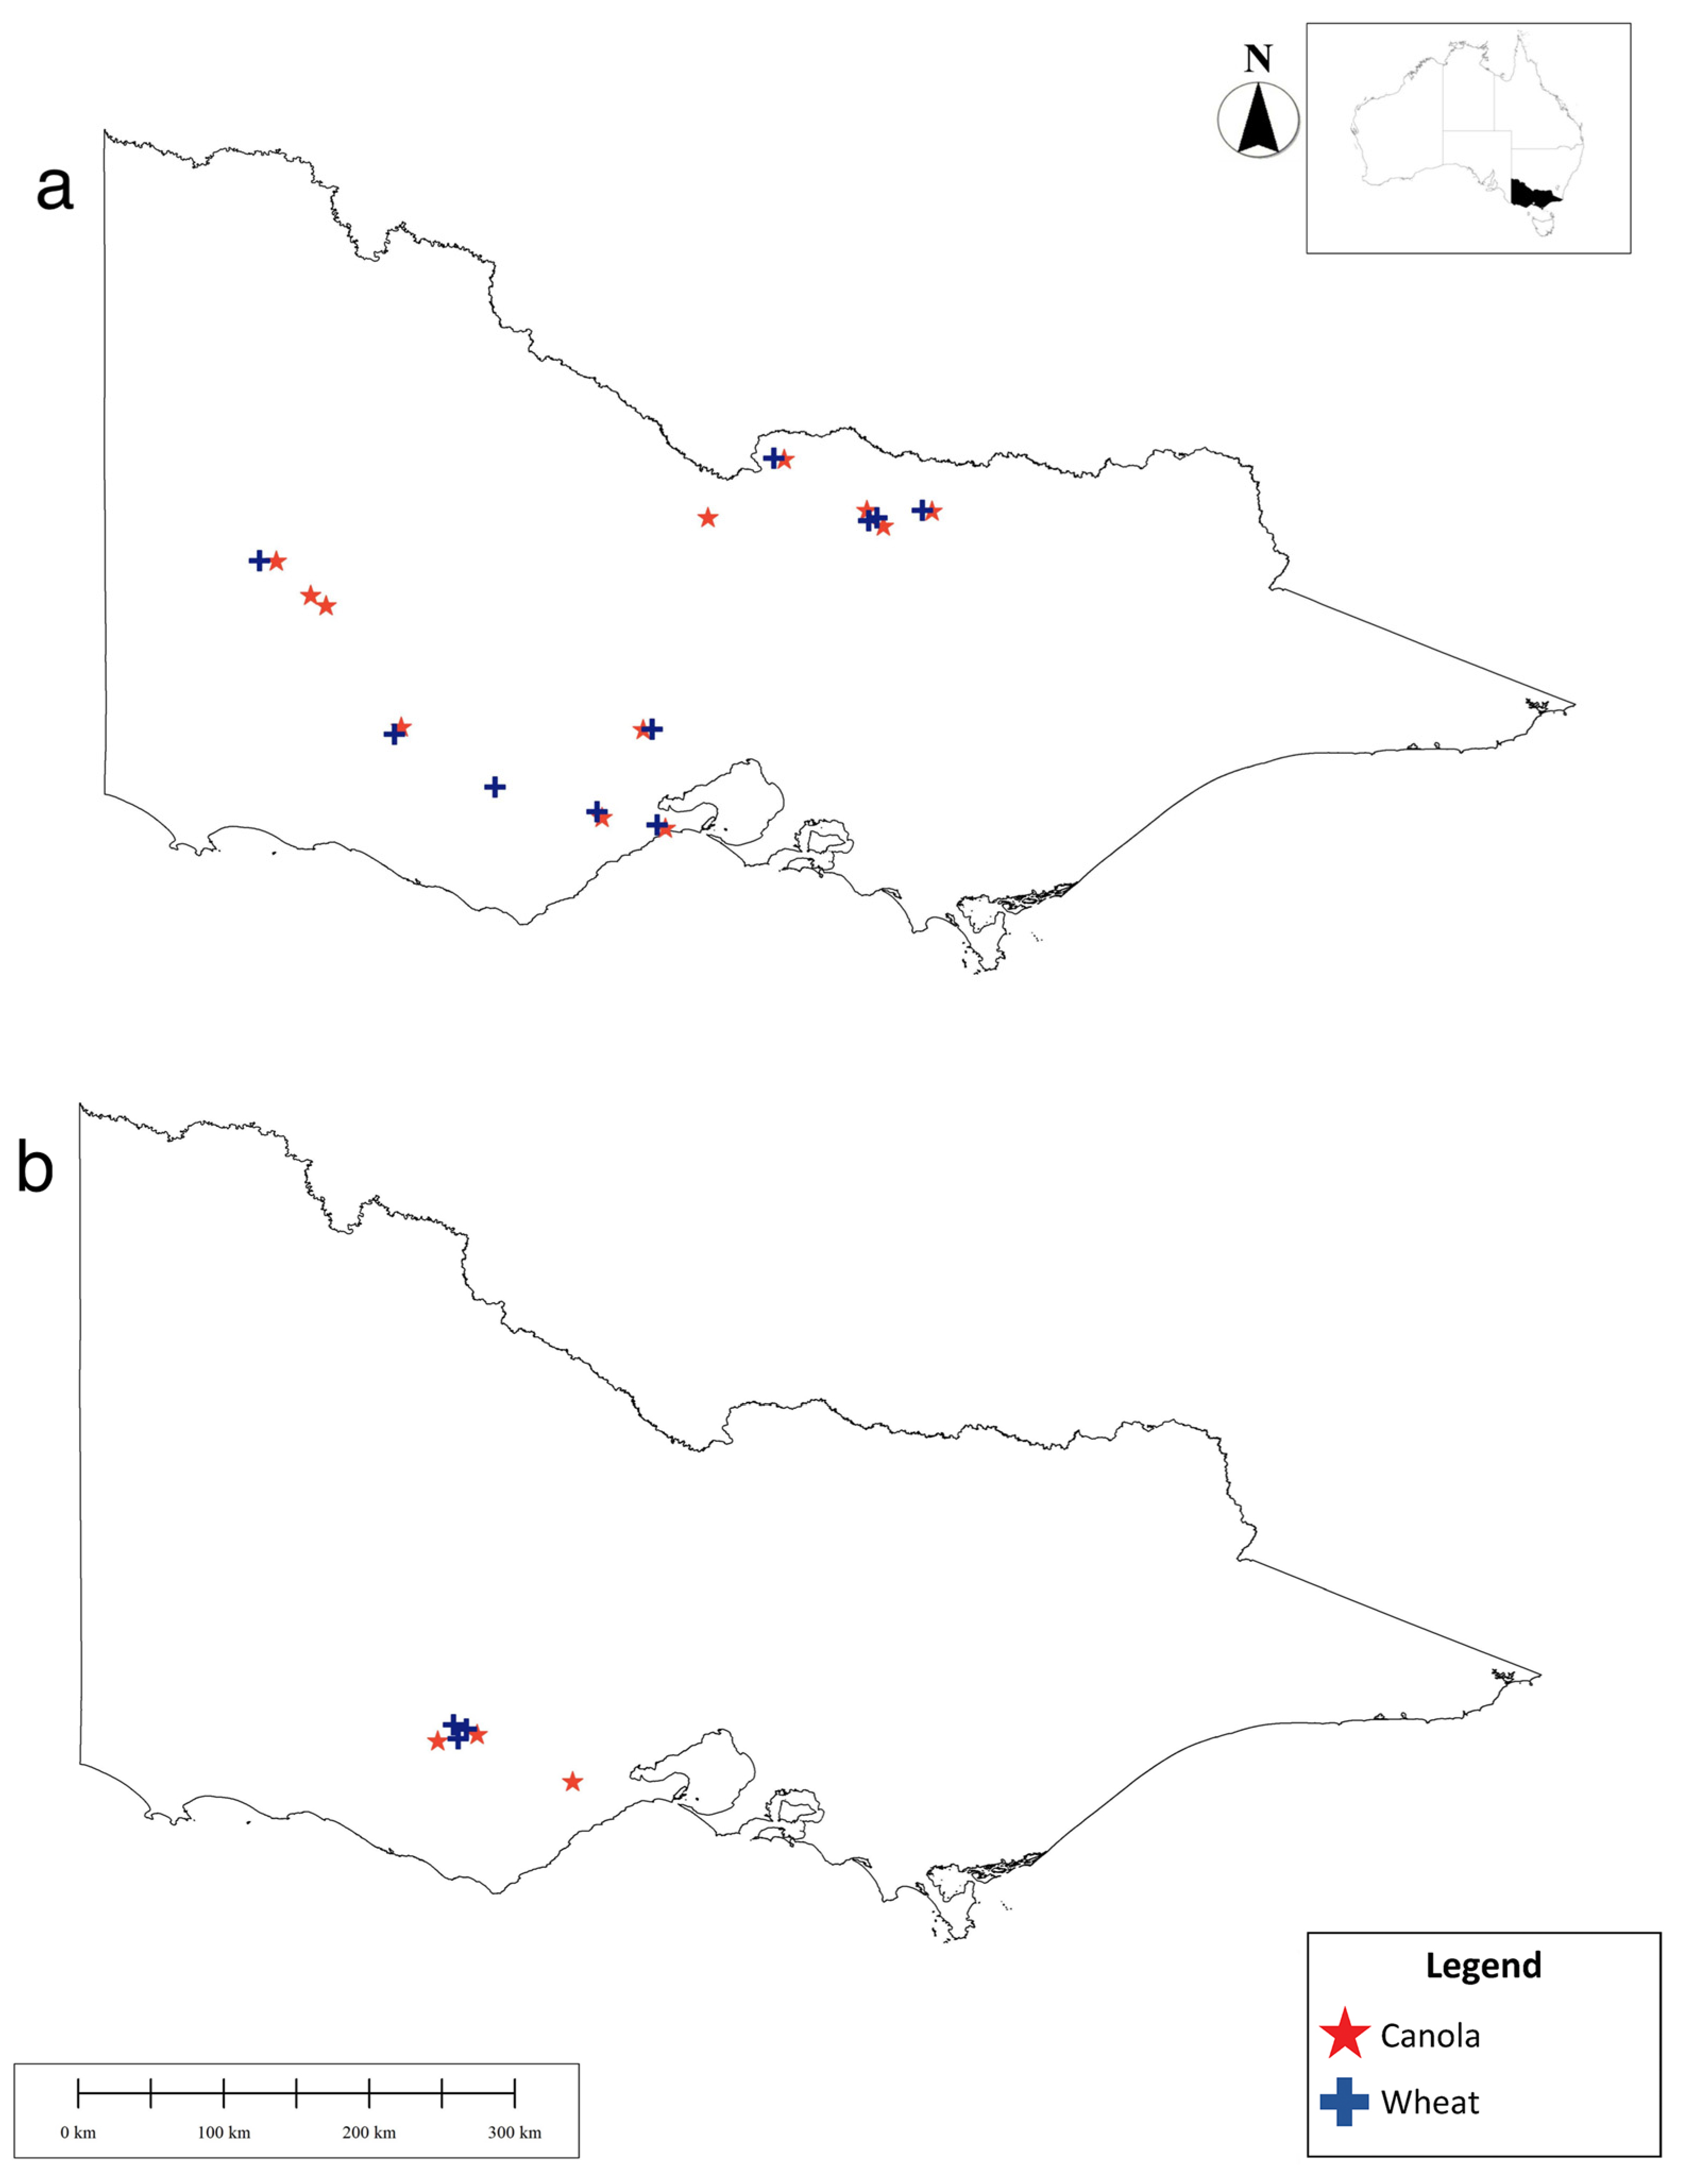 Insects Free Full-Text Hymenopteran Parasitoids of Aphid Pests within Australian Grain Production Landscapes